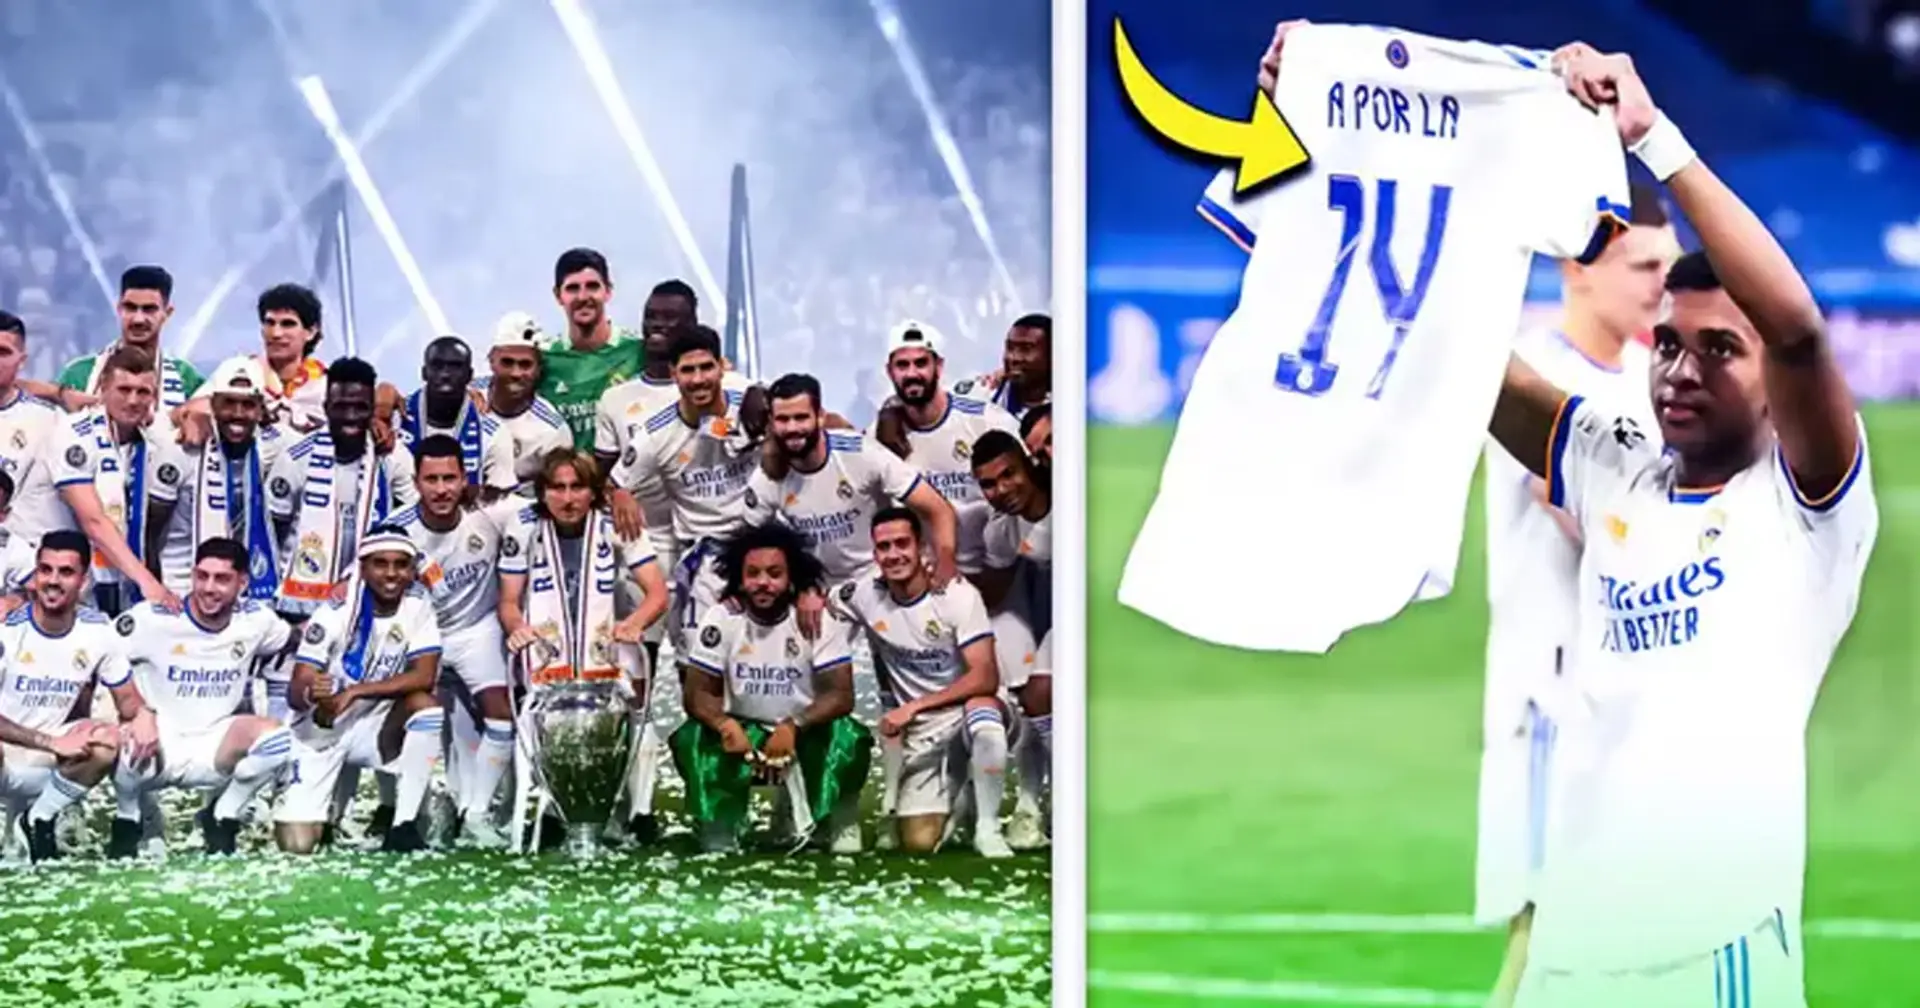 The meaning of Real Madrid's "A Por La 14" jerseys